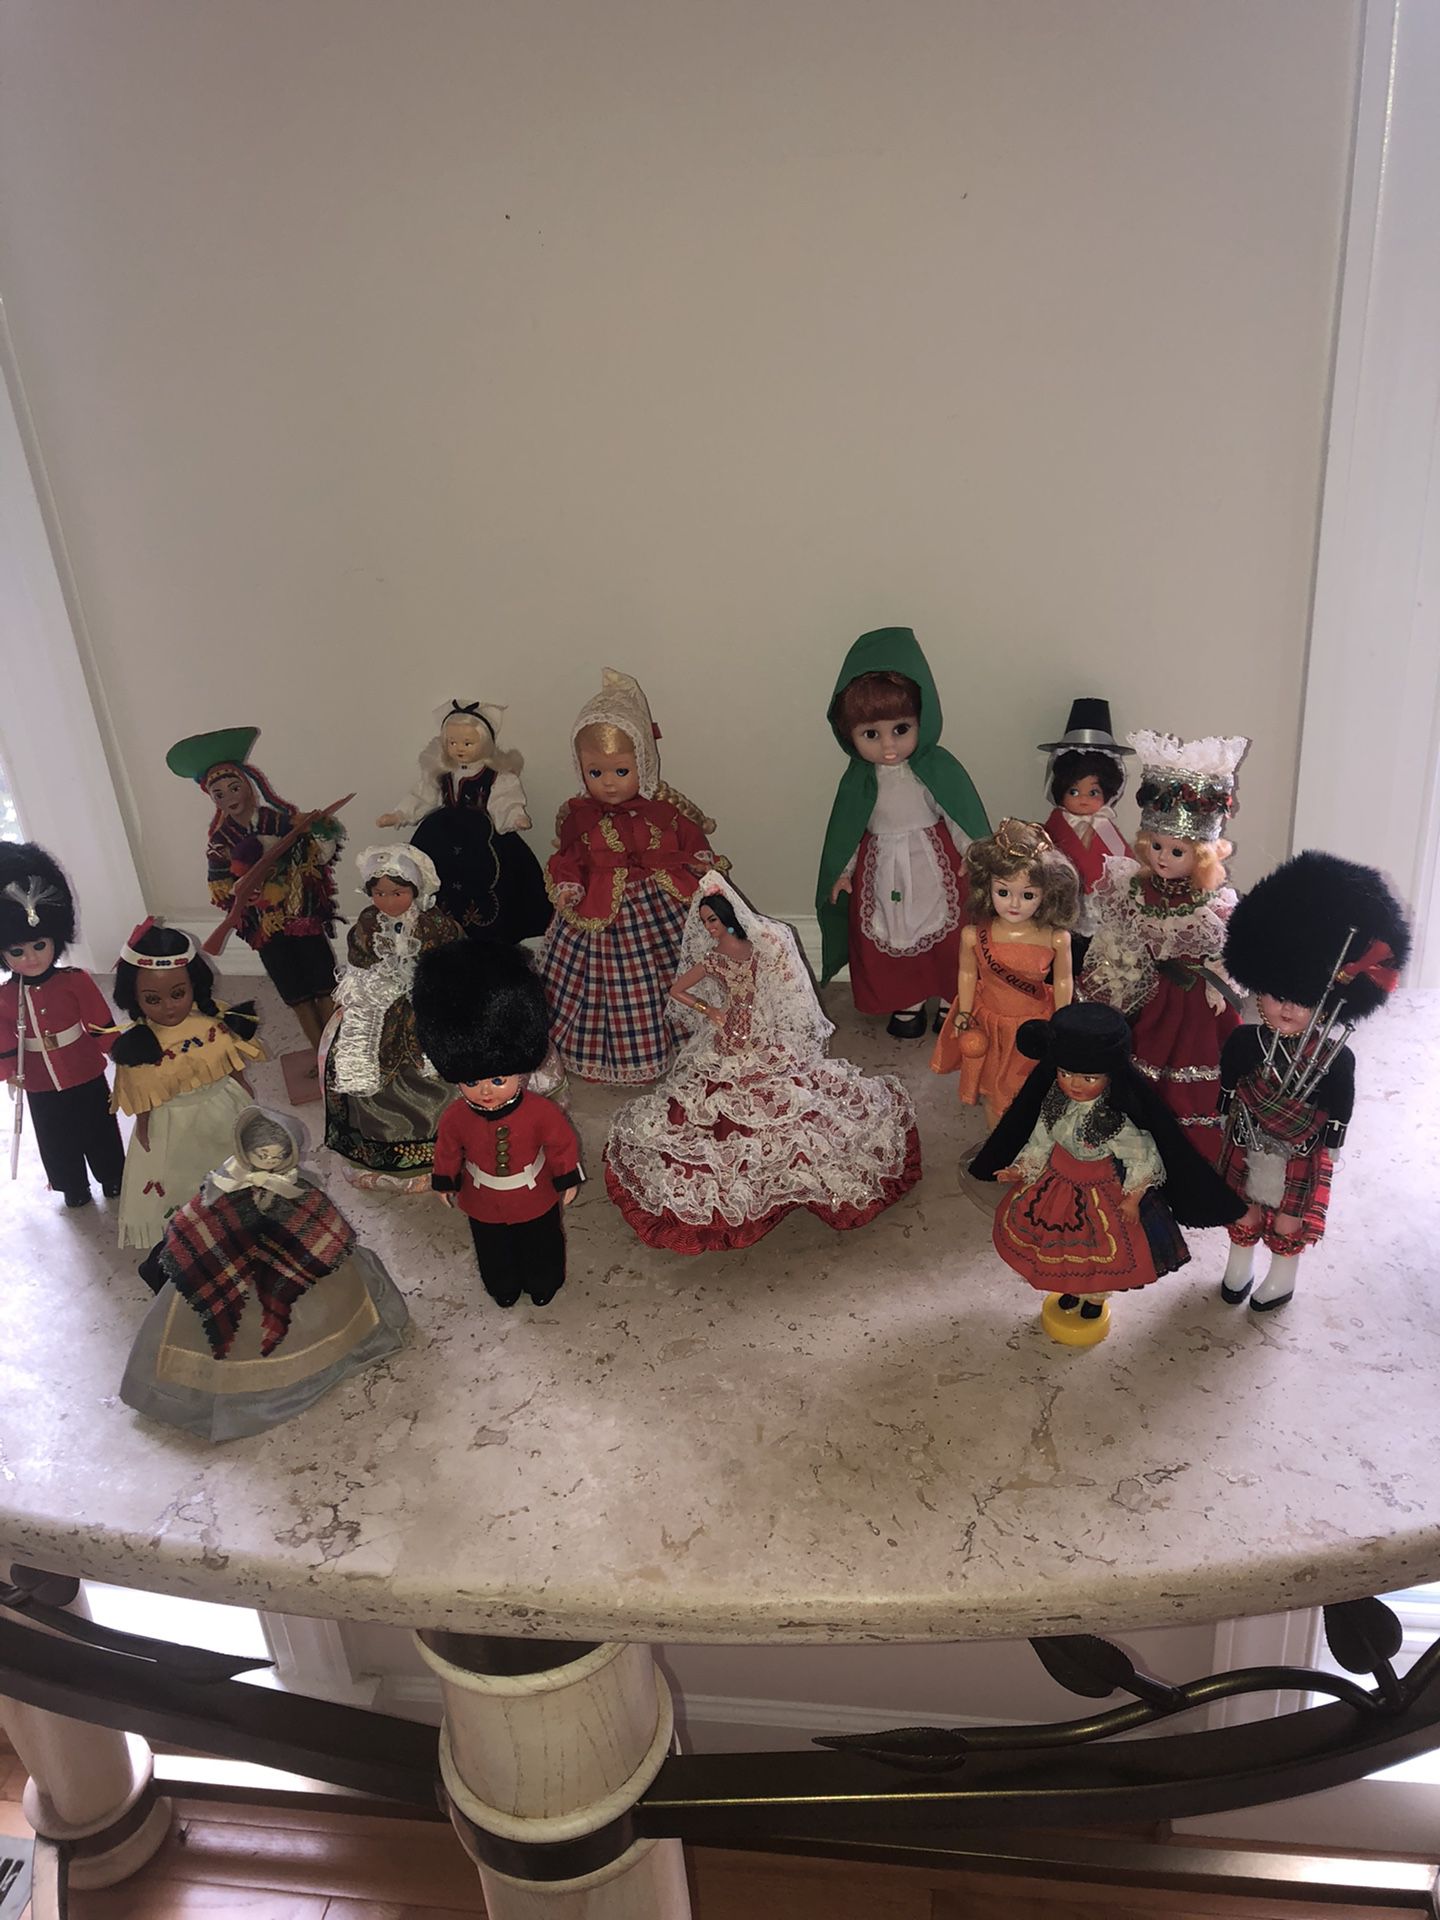 Vintage Global Doll Collection from the 1960s includes 15 Dolls